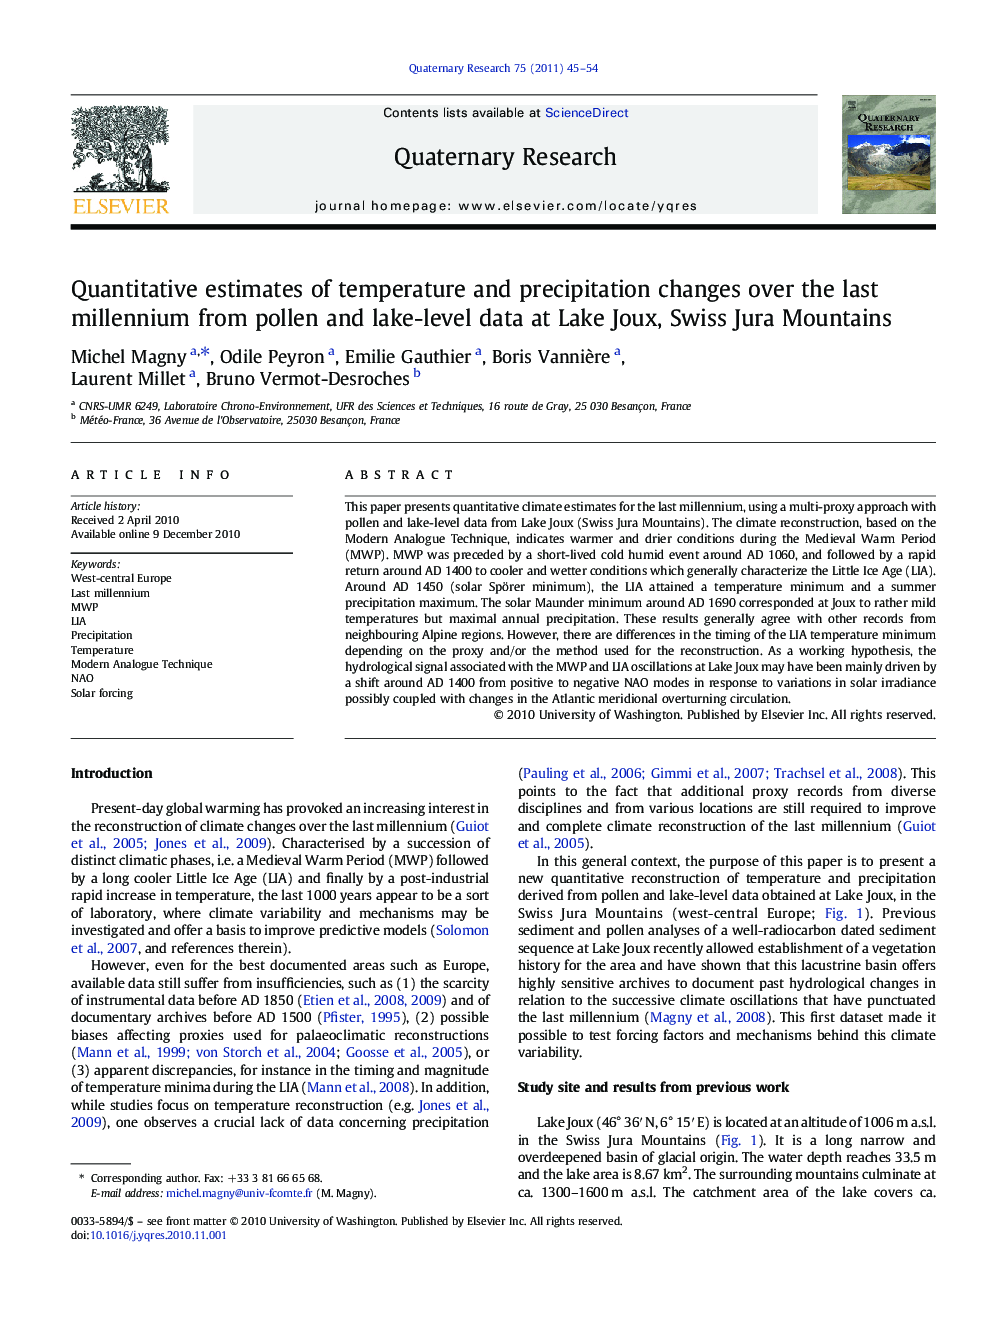 Quantitative estimates of temperature and precipitation changes over the last millennium from pollen and lake-level data at Lake Joux, Swiss Jura Mountains